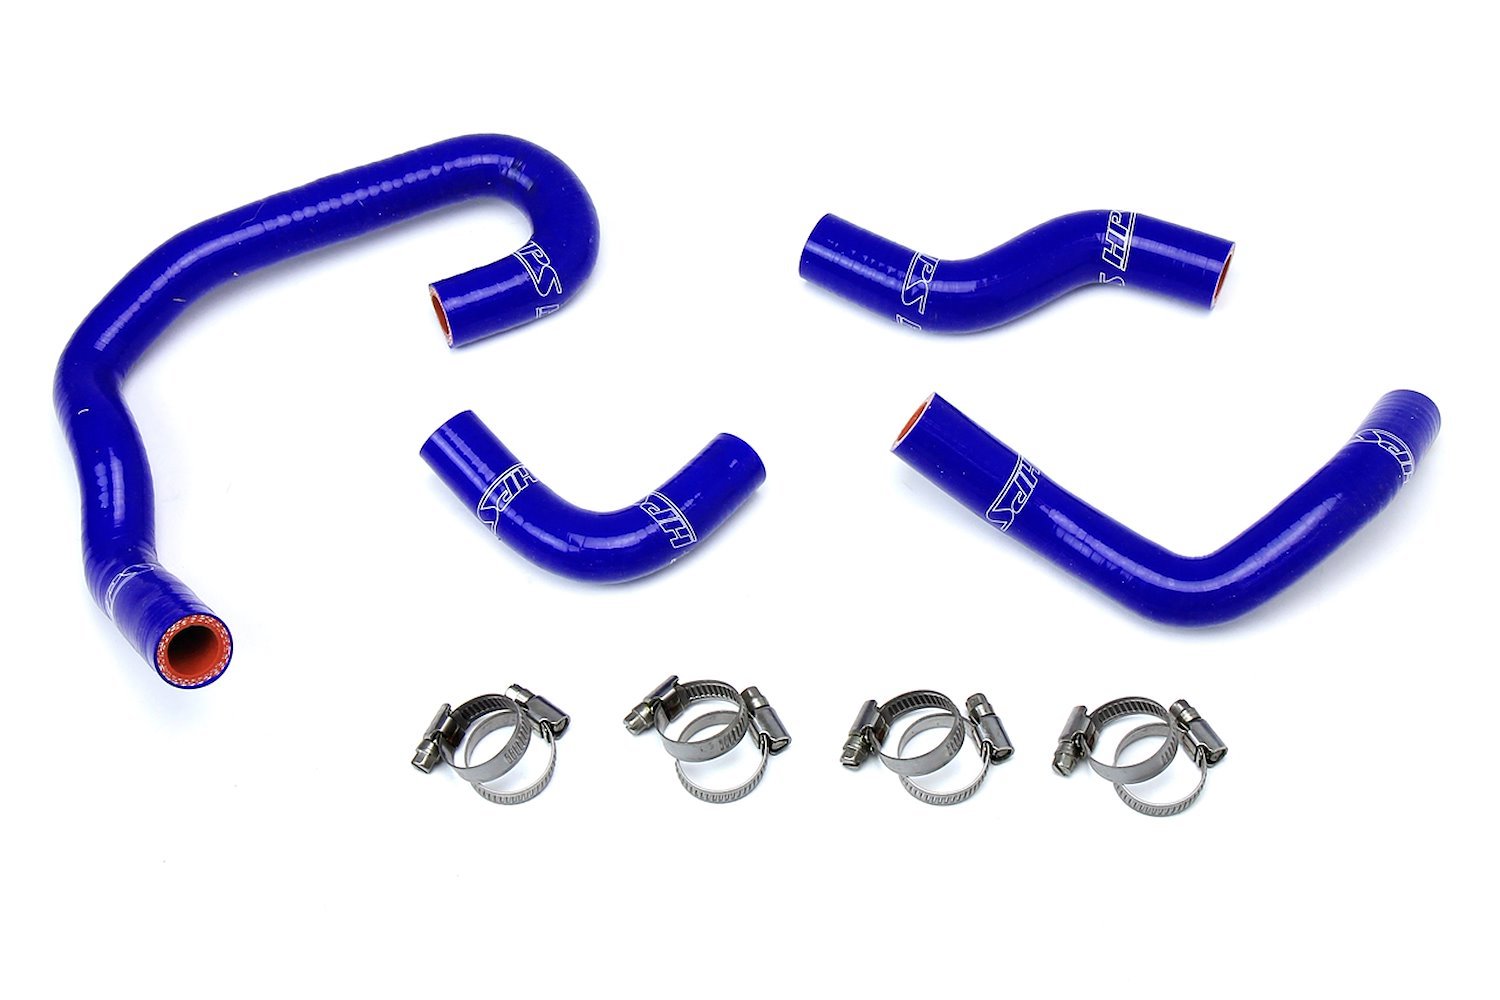 57-1323H-BLUE Heater Hose Kit, High-Temp 3-Ply Reinforced Silicone, Replace OEM Rubber Heater Coolant Hoses